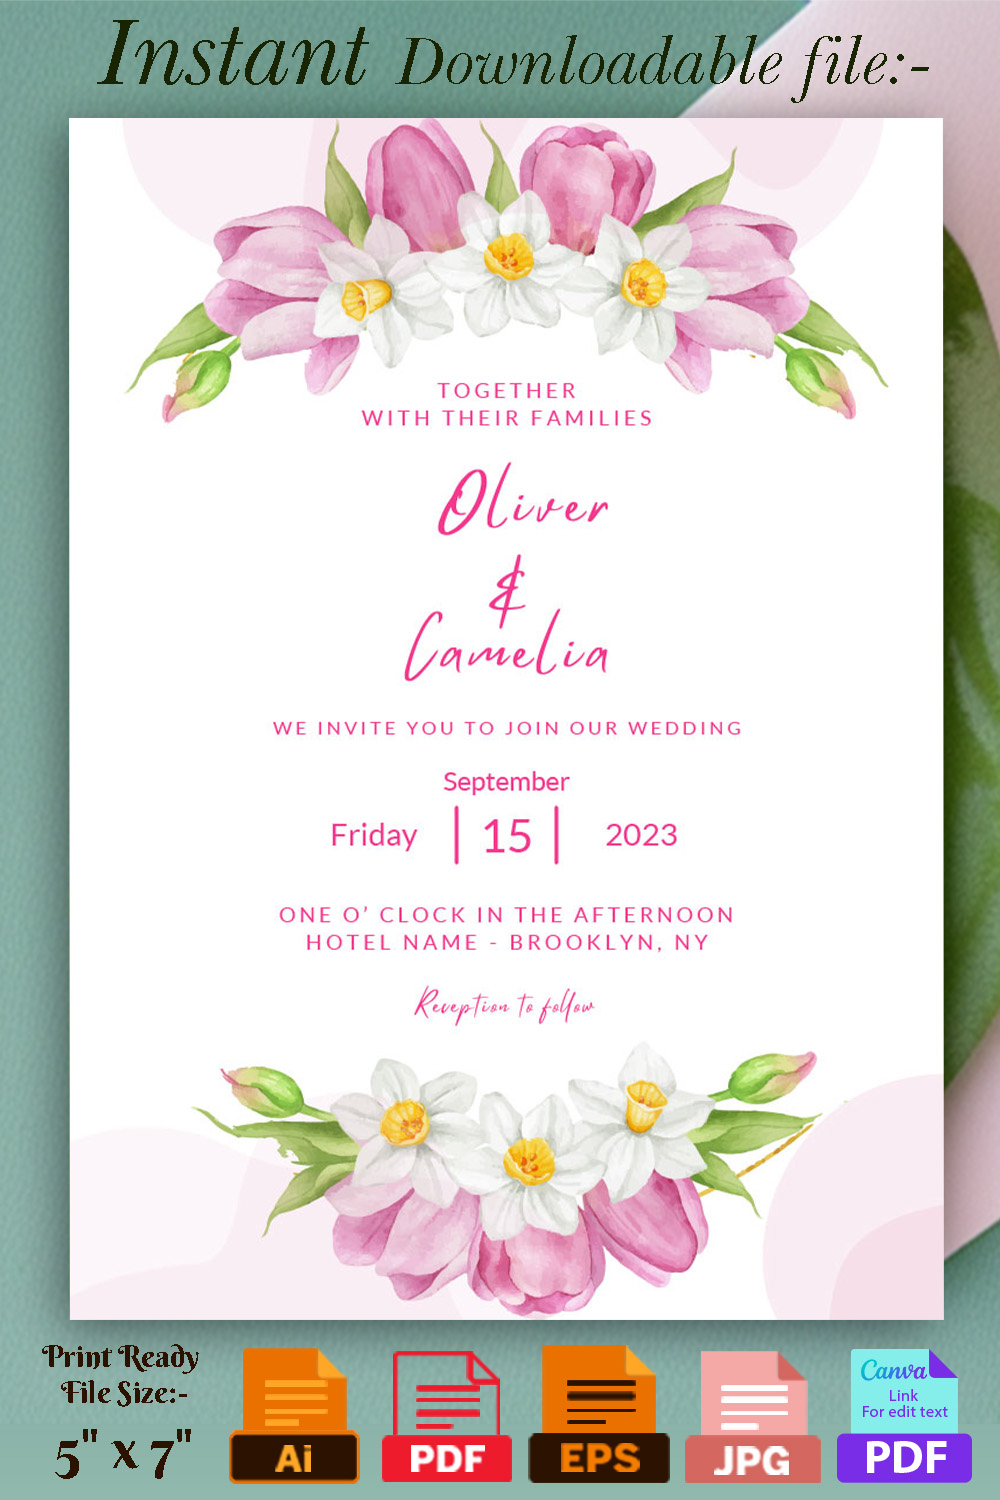 Image with enchanting wedding invitation with flowers.